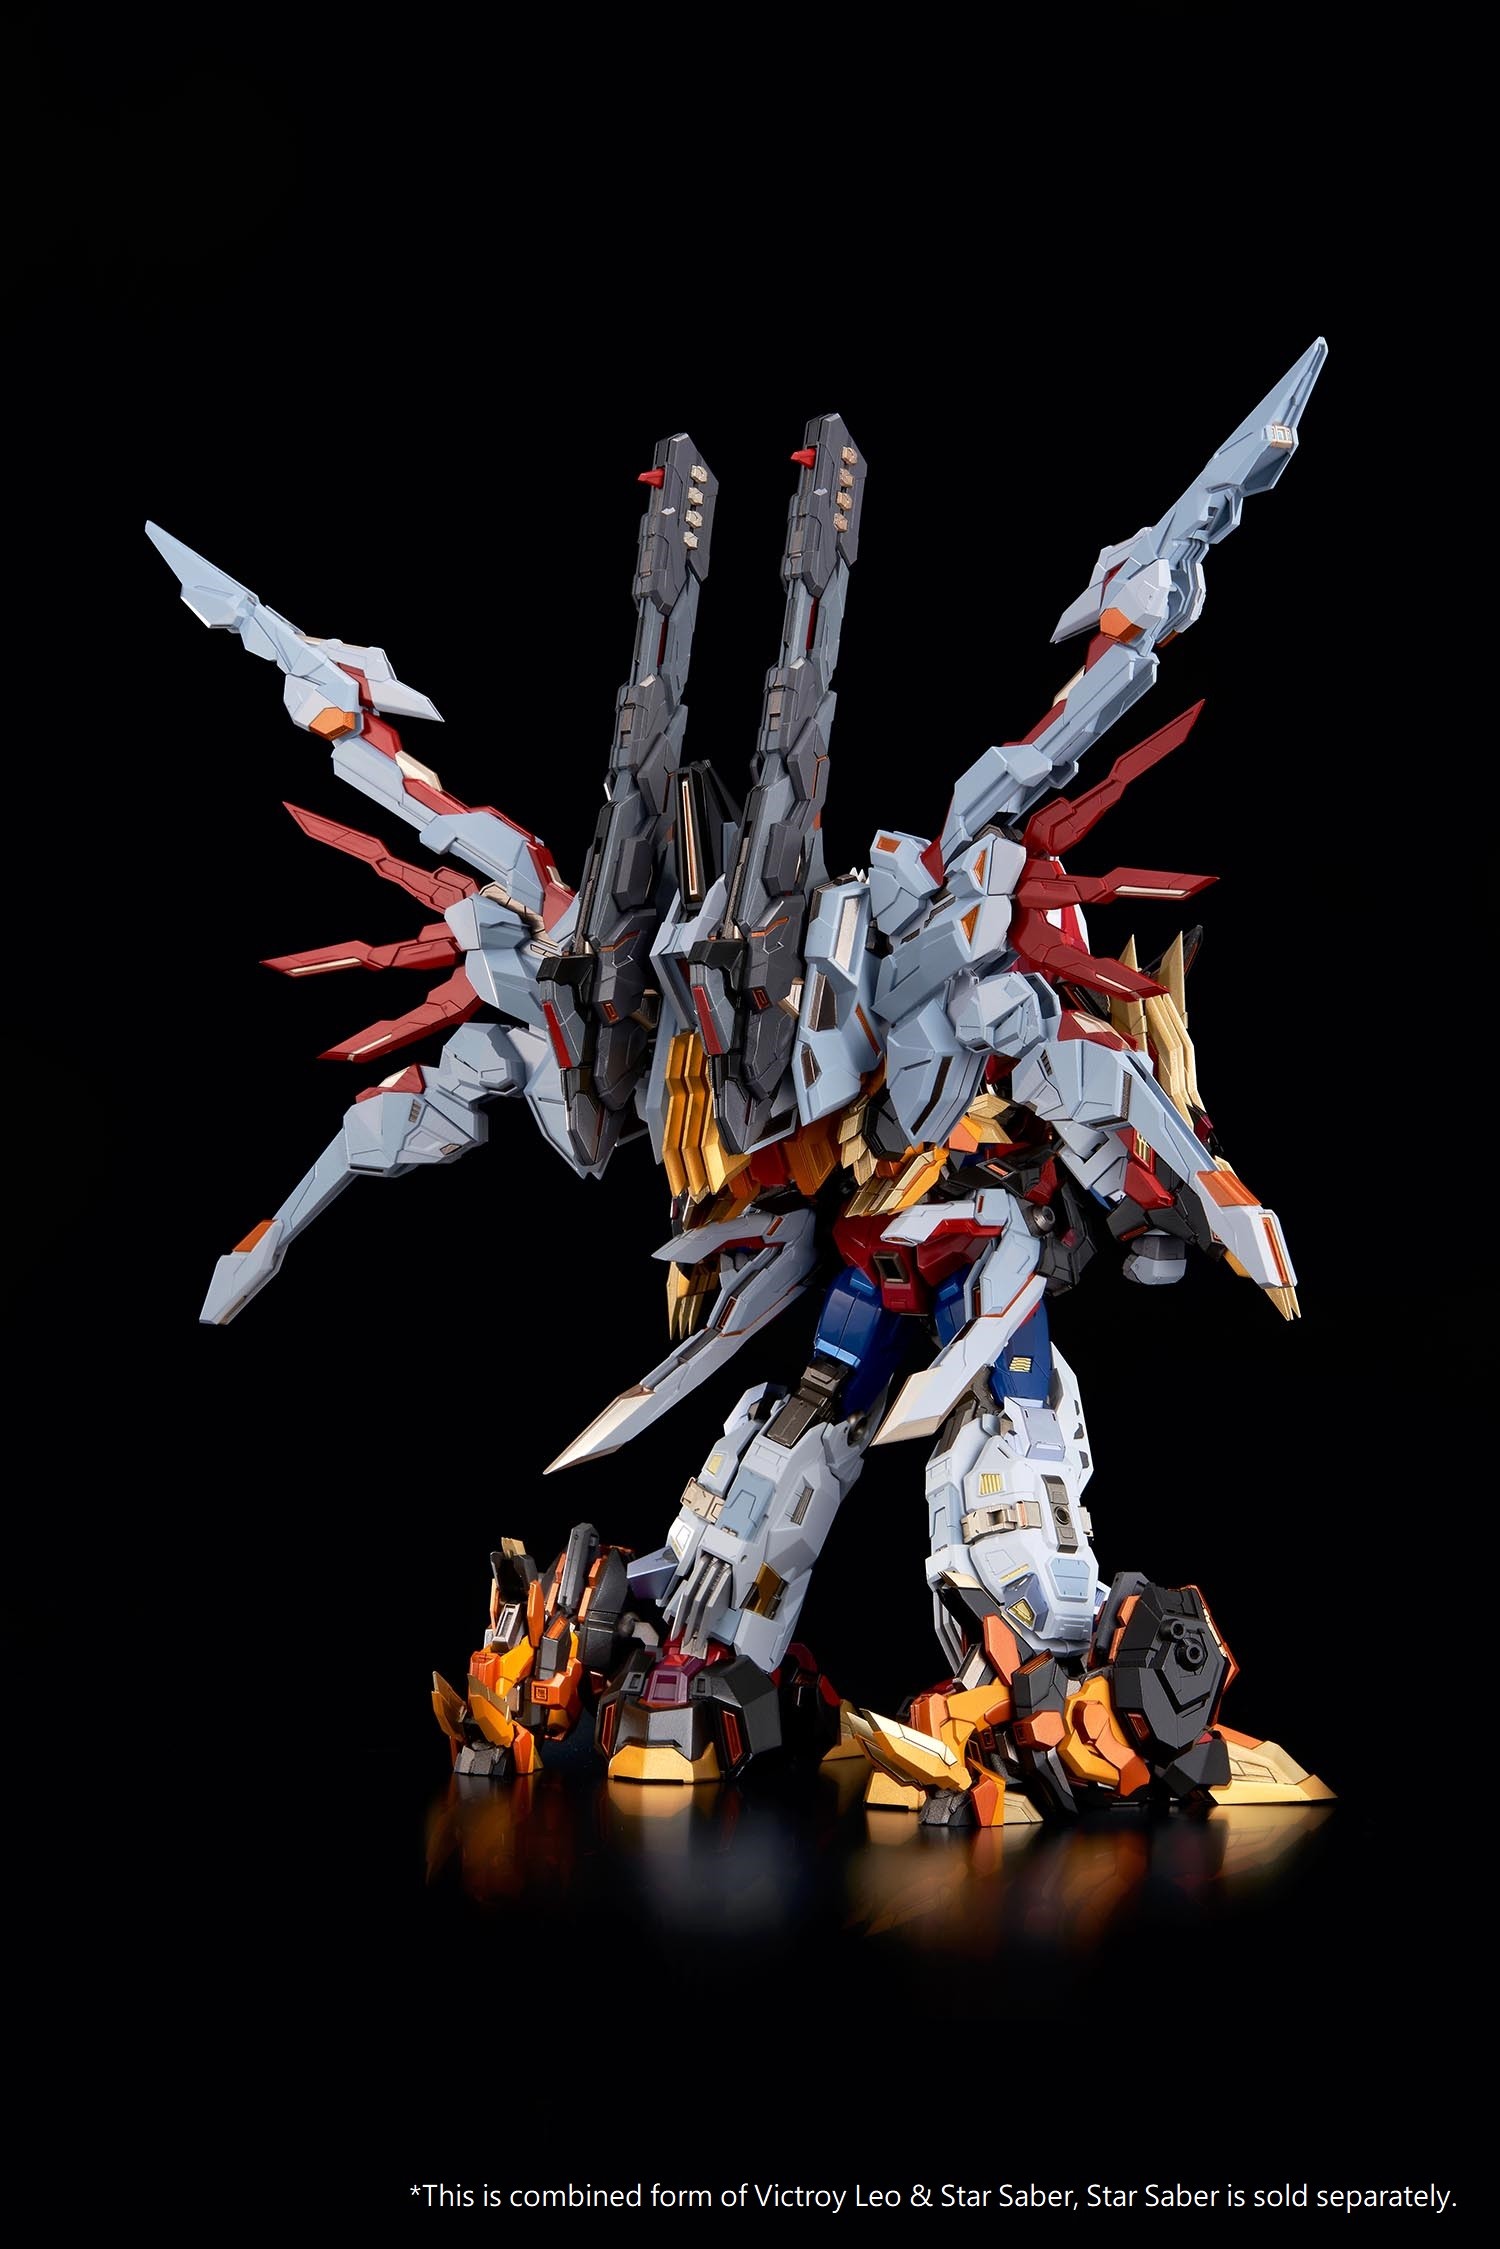 Transformers News: New Images of Flame Toys Kuro Kara Kuri Victory Saber and Pricing, Release Date for Victory Leo